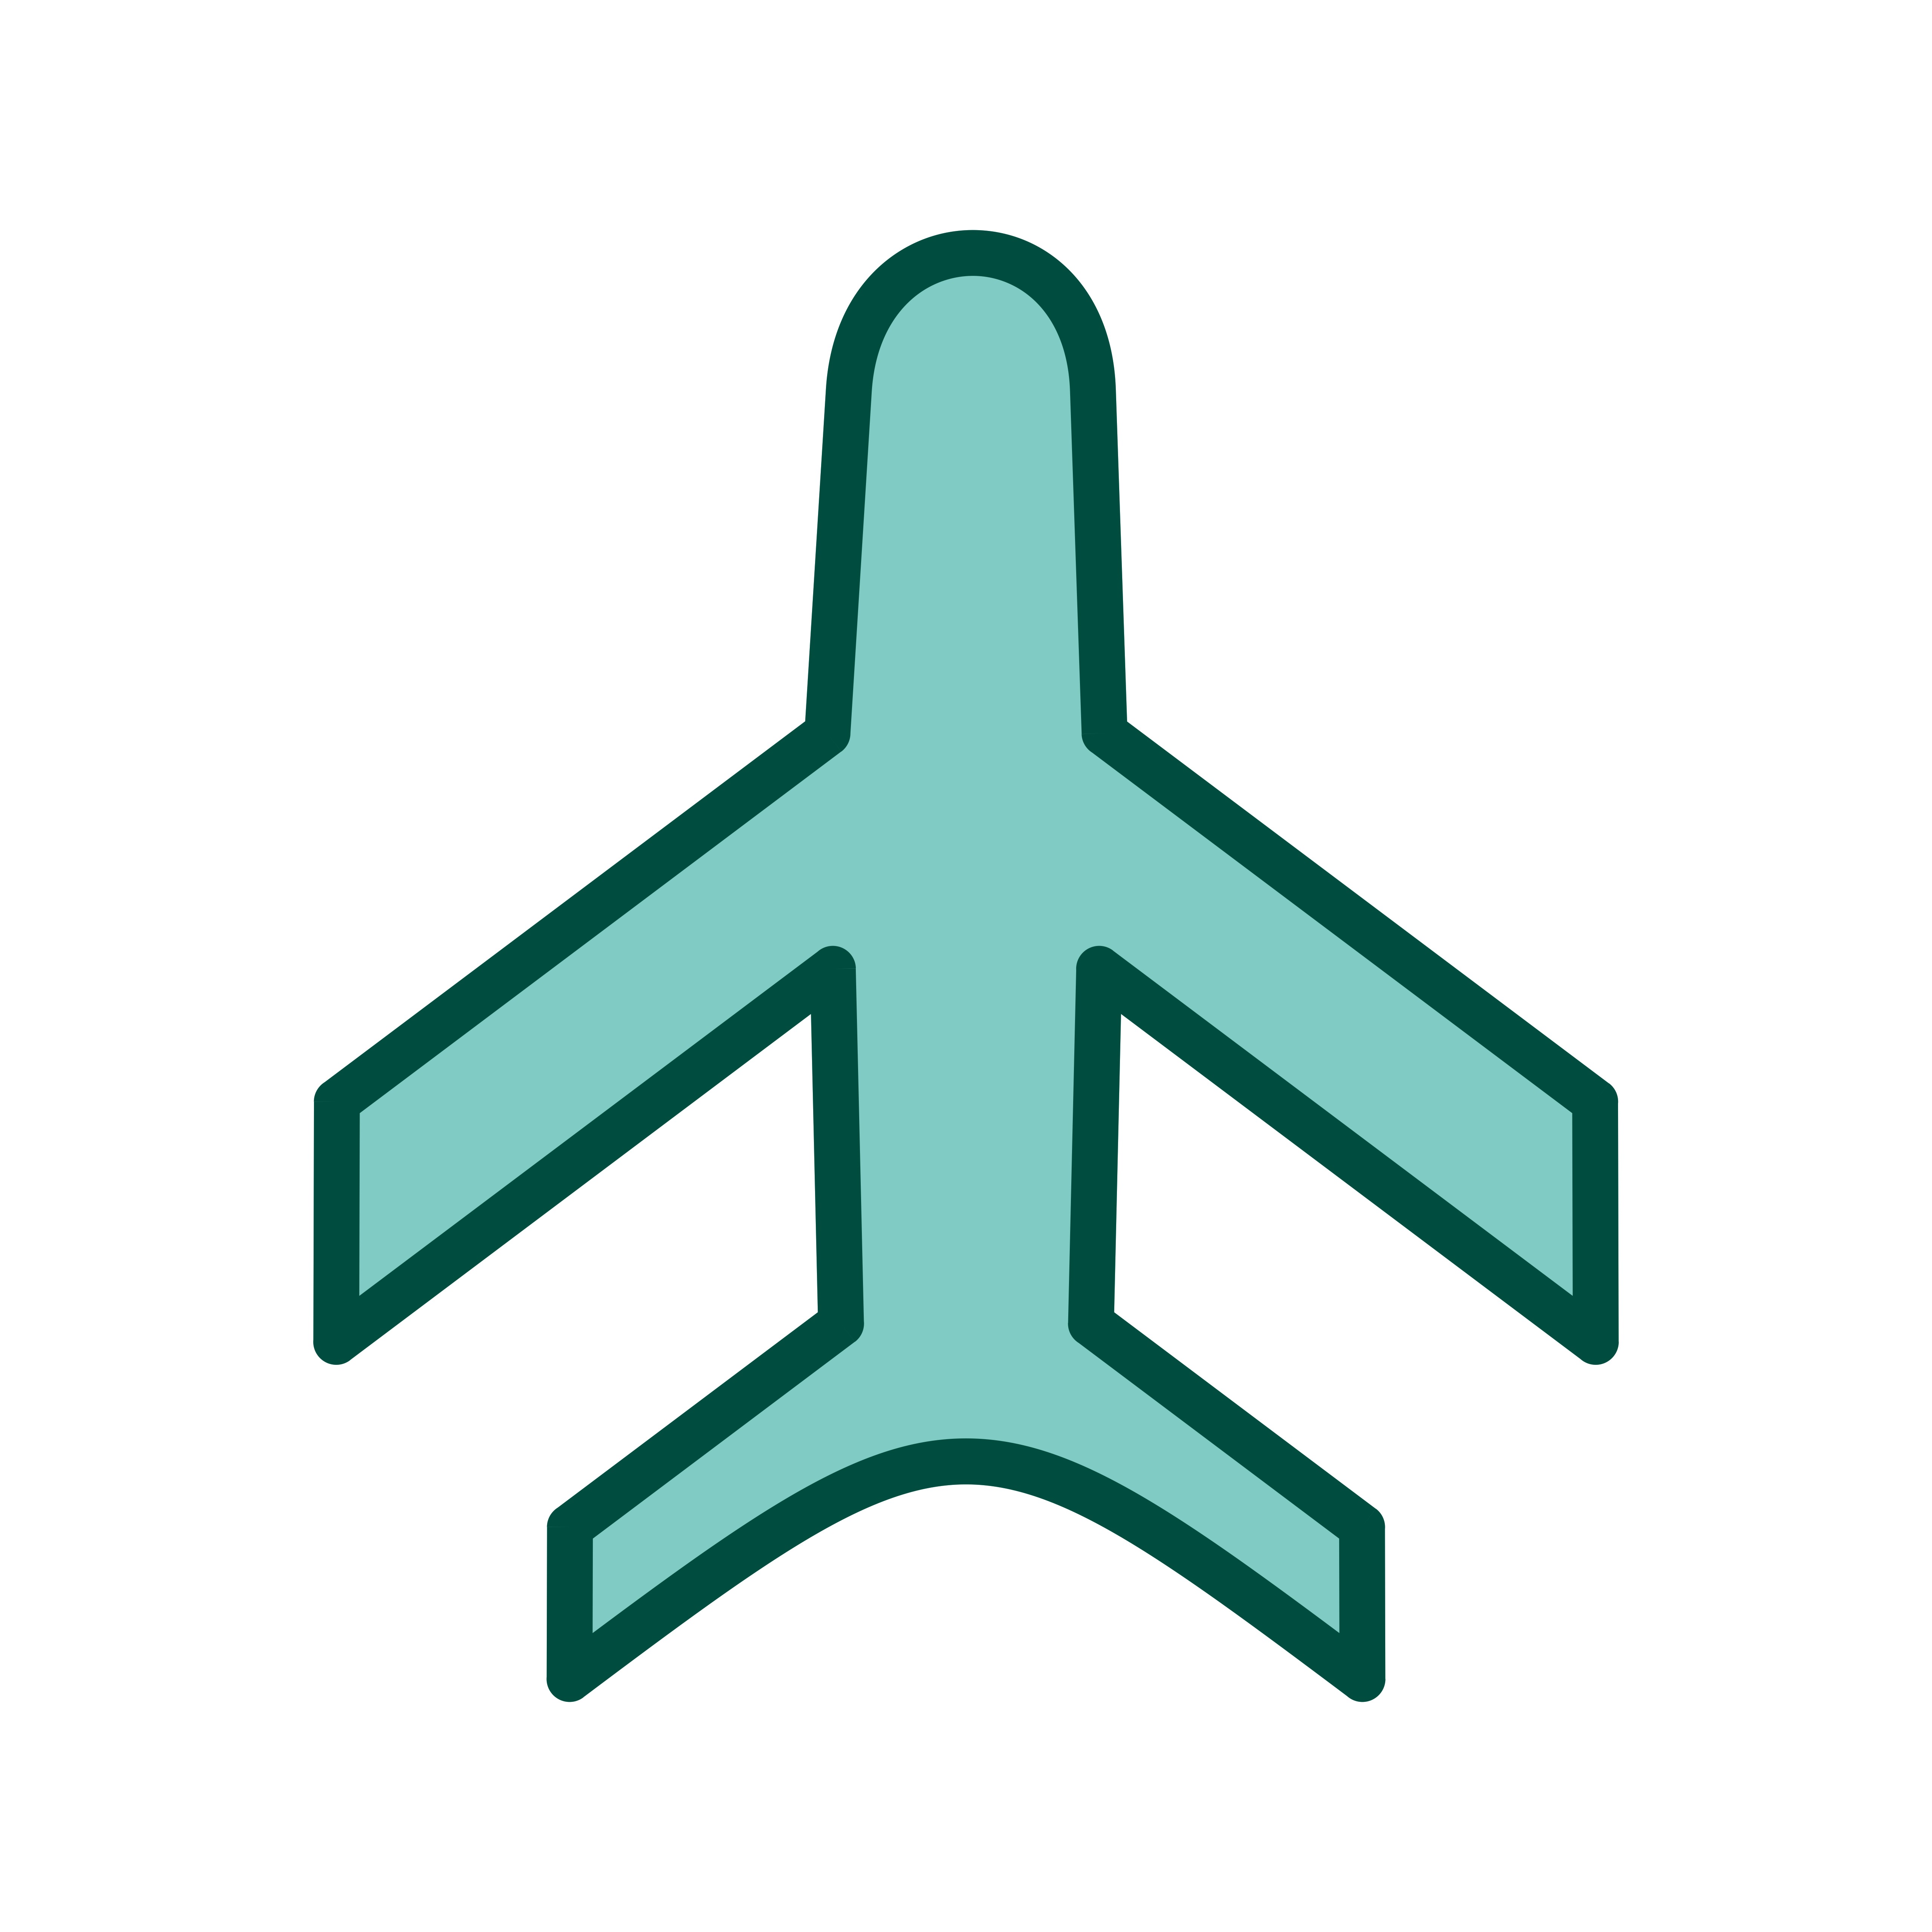 Download Airplane Icon Design - Download Free Vectors, Clipart ...